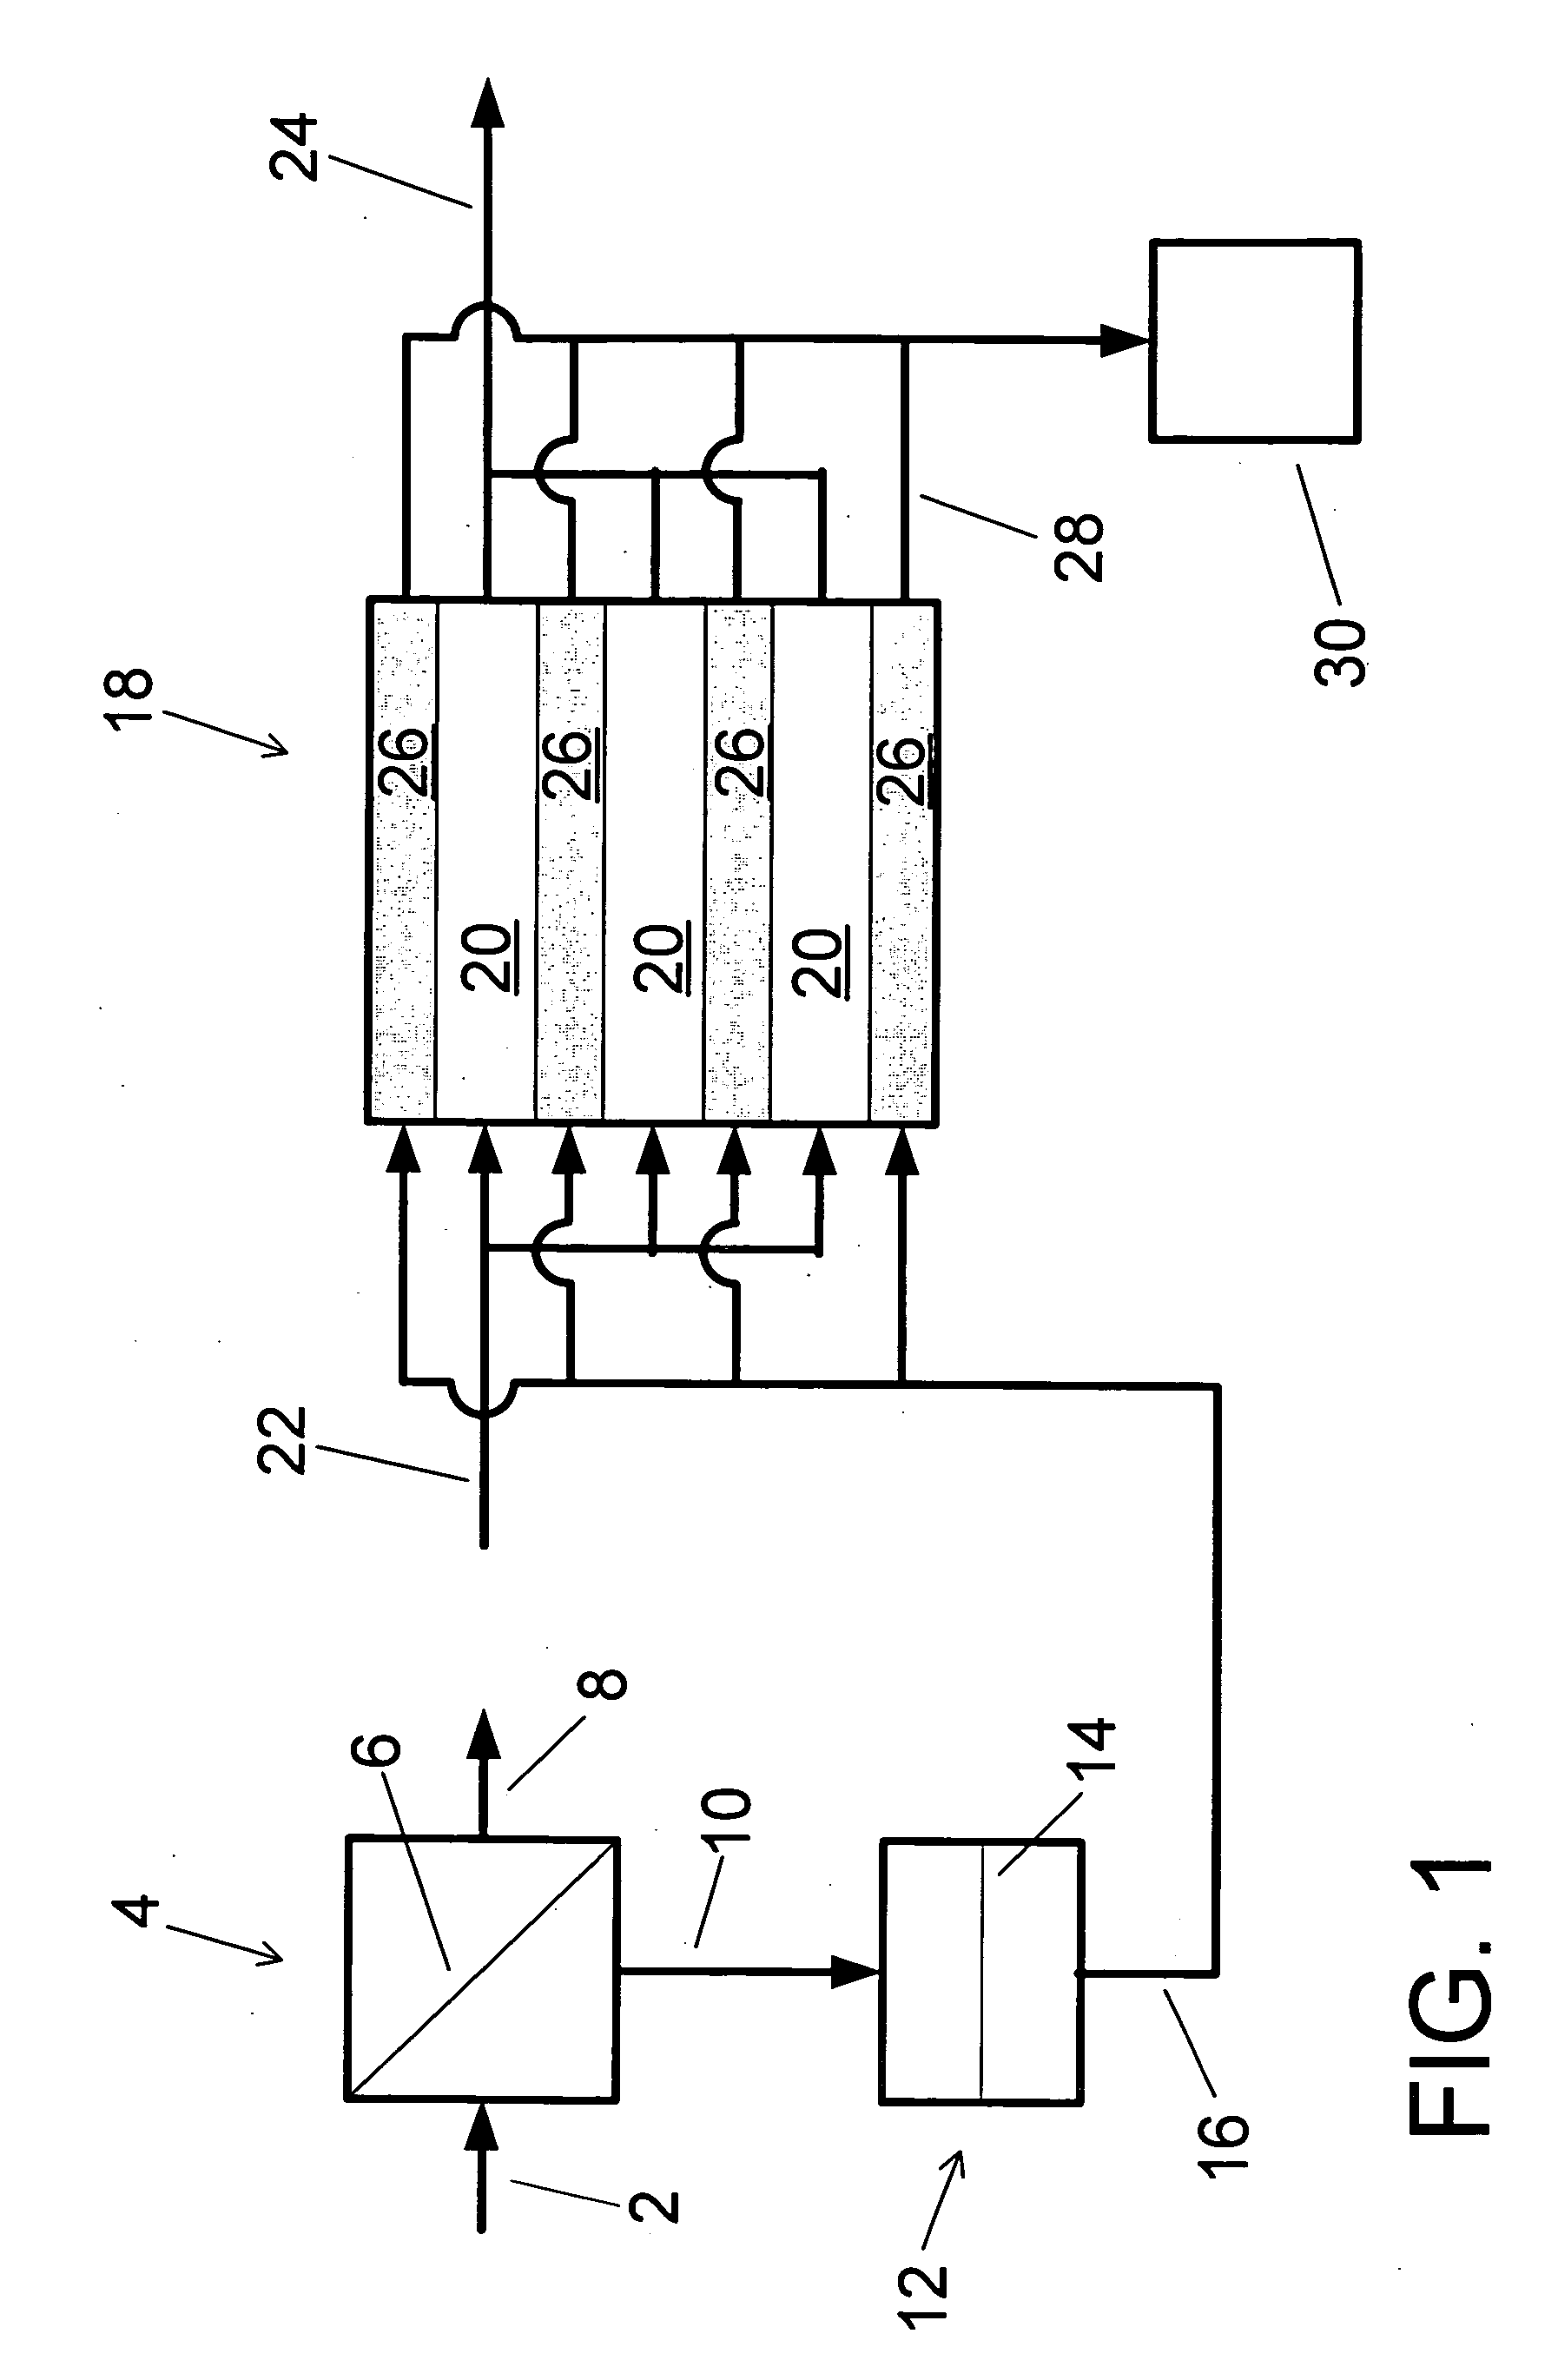 Water purification system and method using reverse osmosis reject stream in an electrodeionization unit